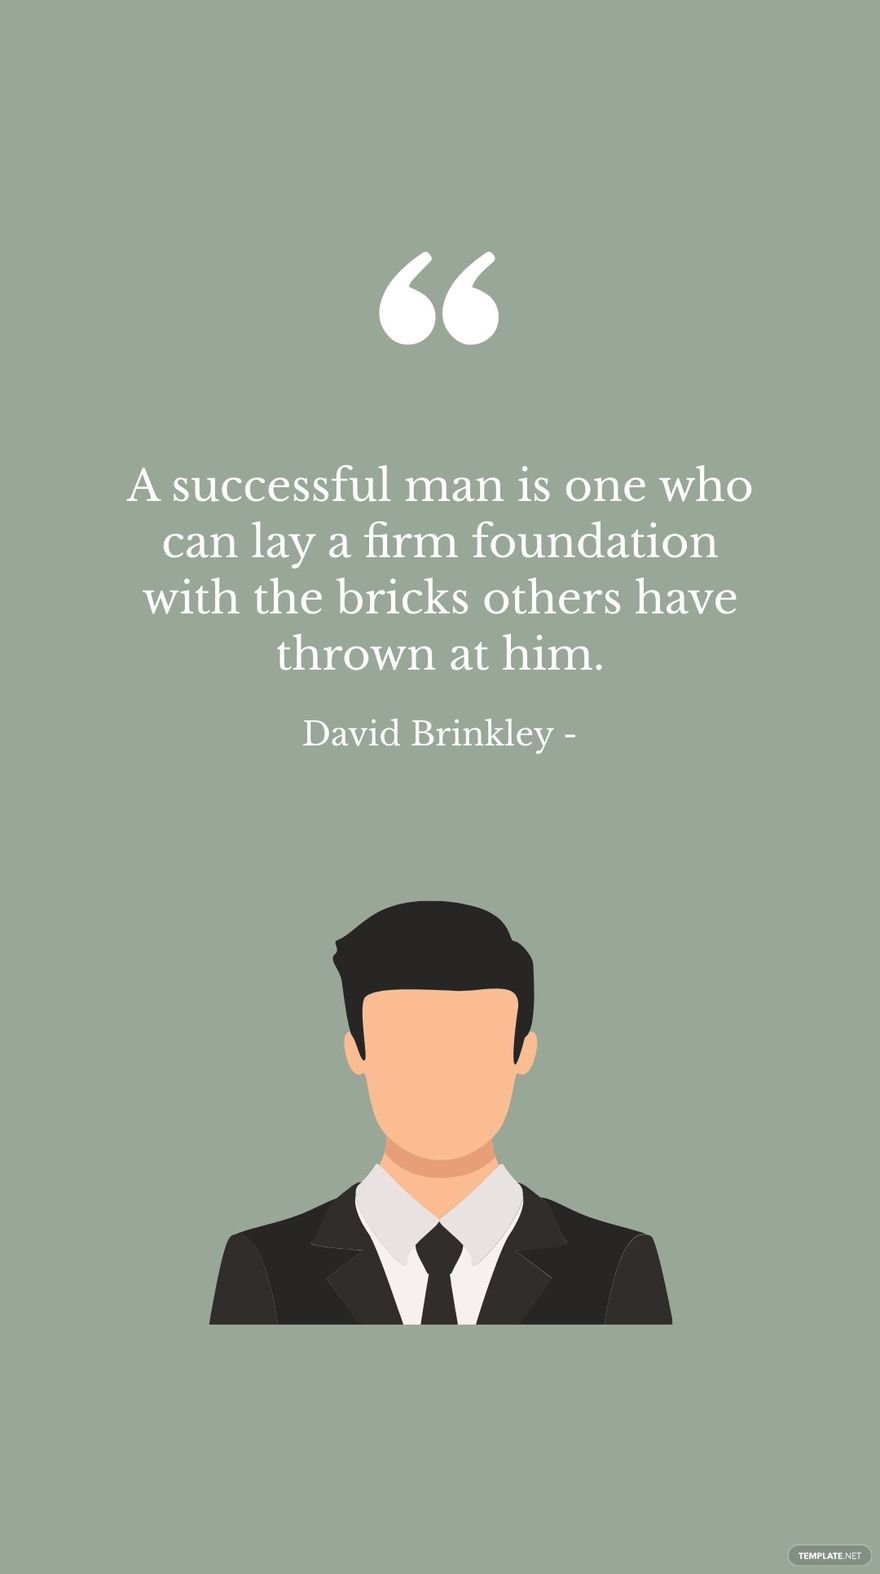 Free David Brinkley - A successful man is one who can lay a firm foundation with the bricks others have thrown at him. in JPG